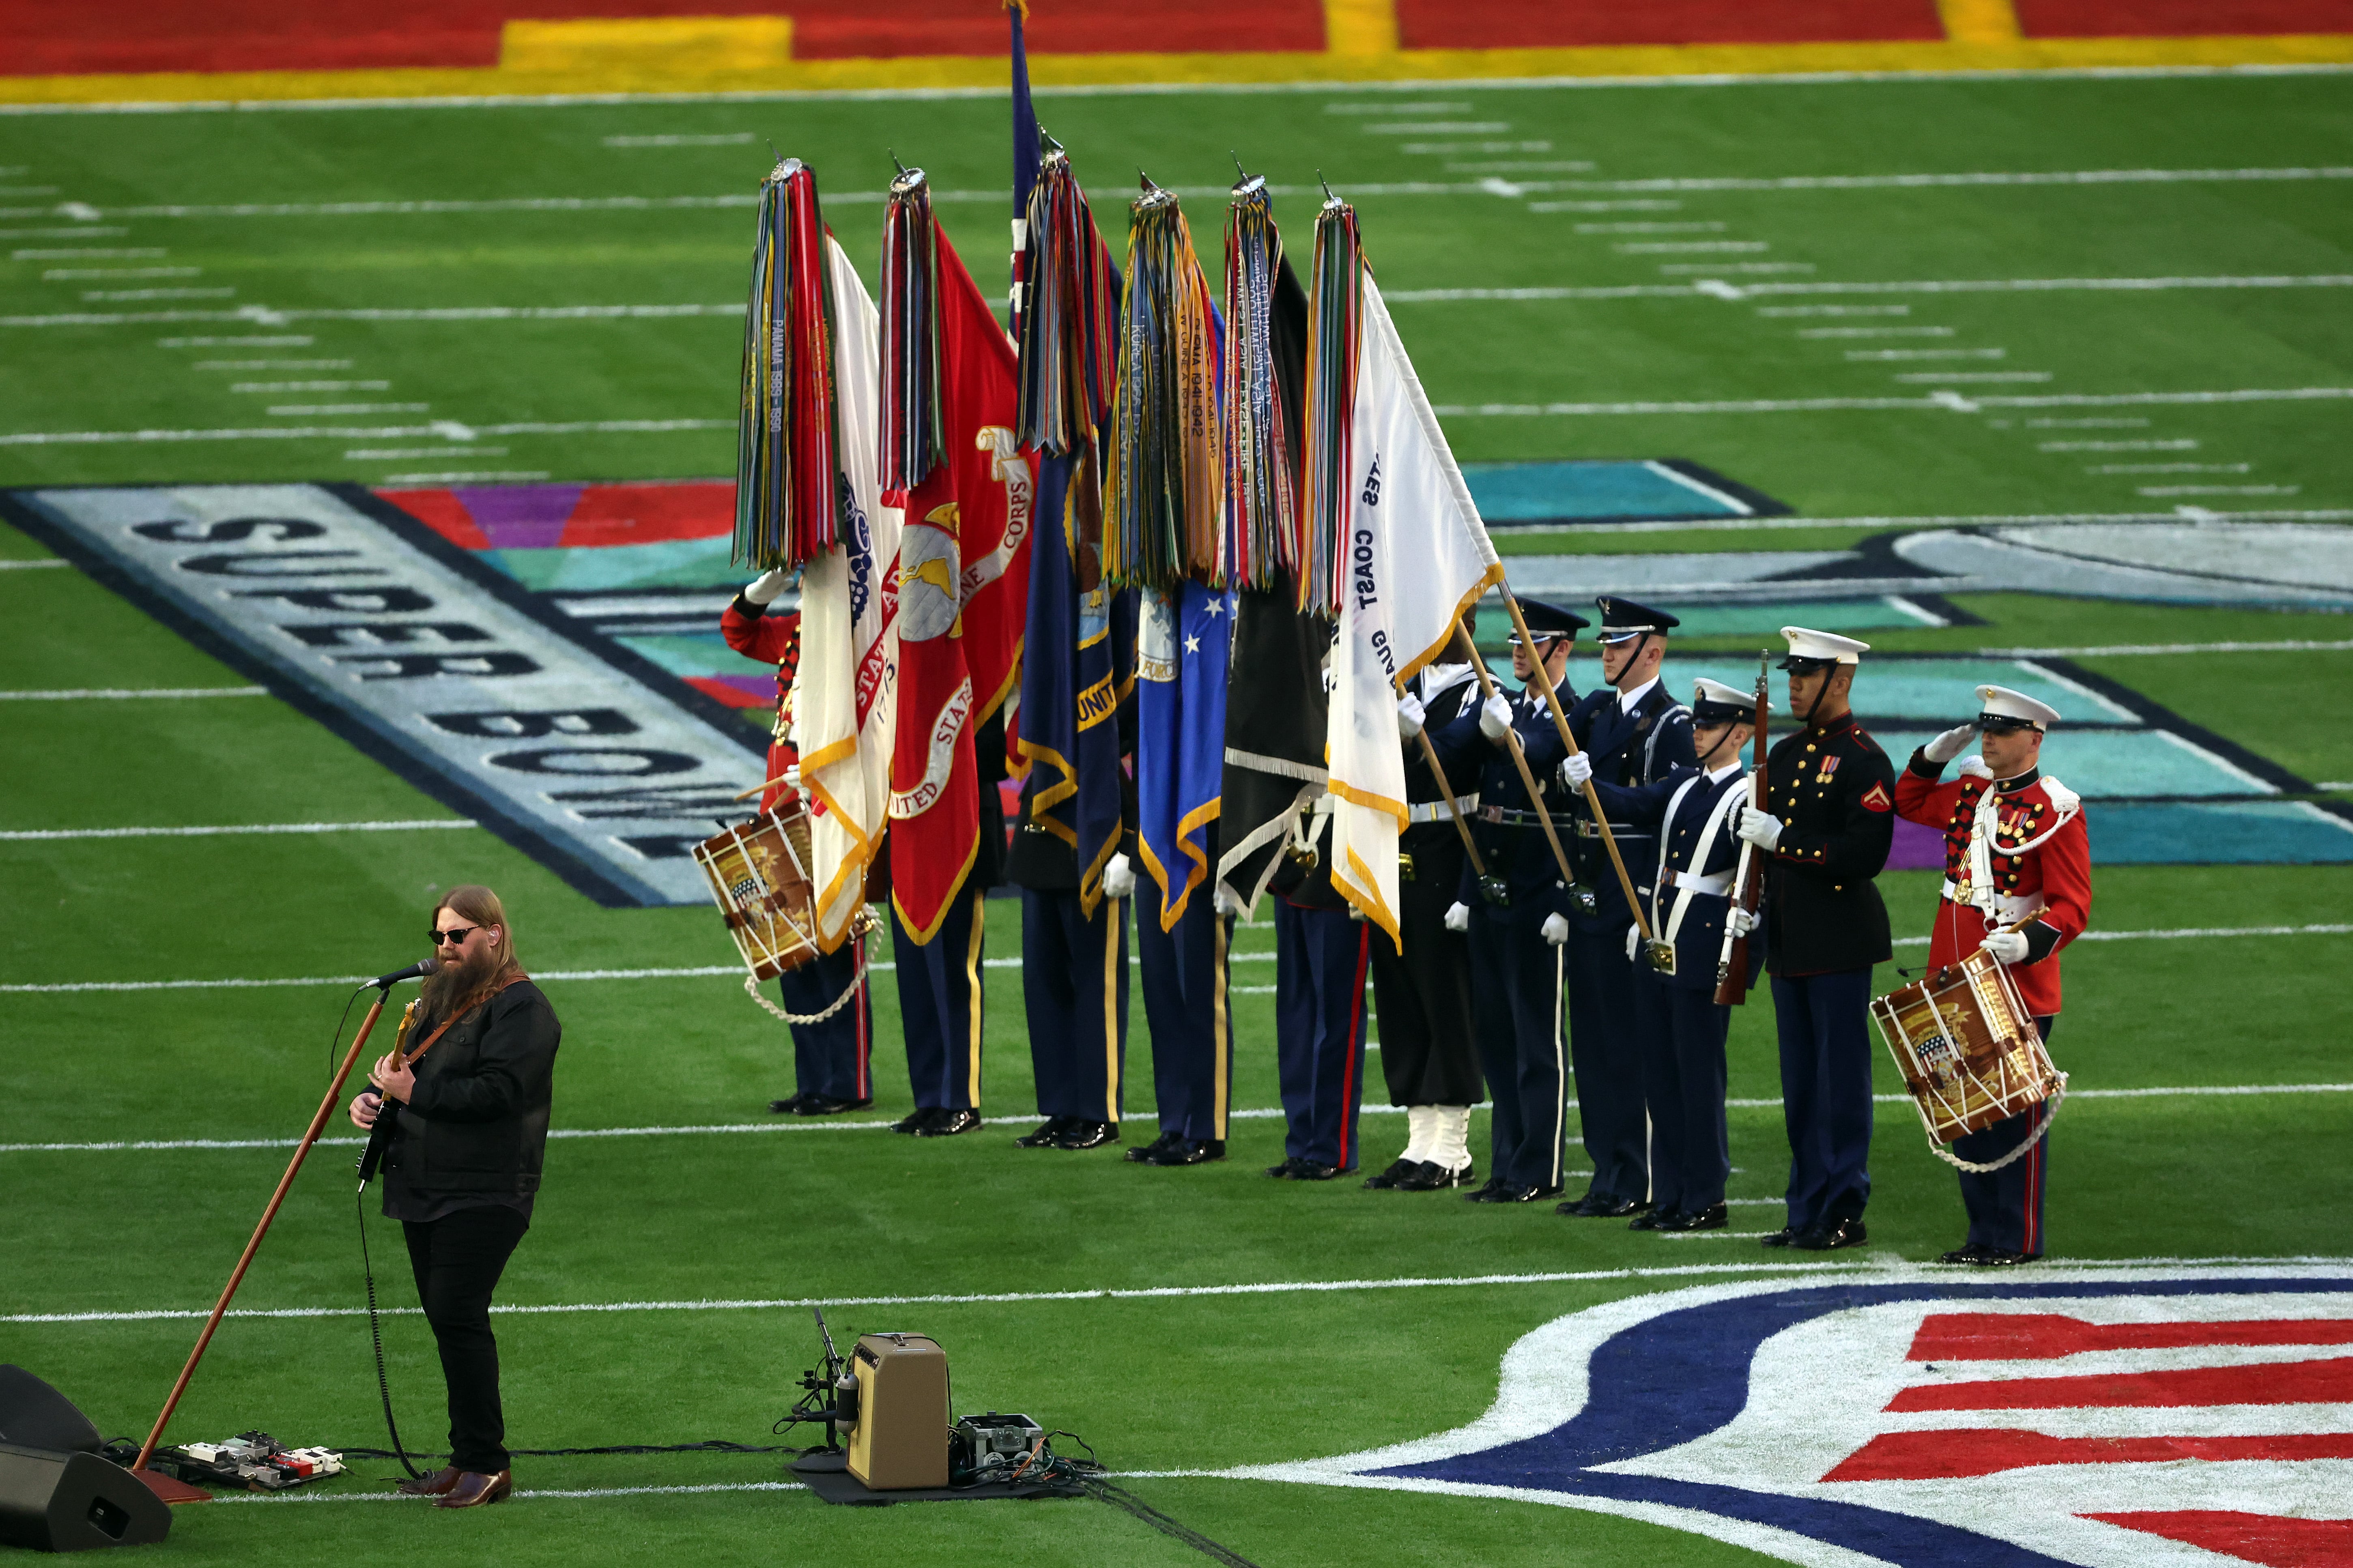 Who will sing the National anthem at the Super Bowl 2023?